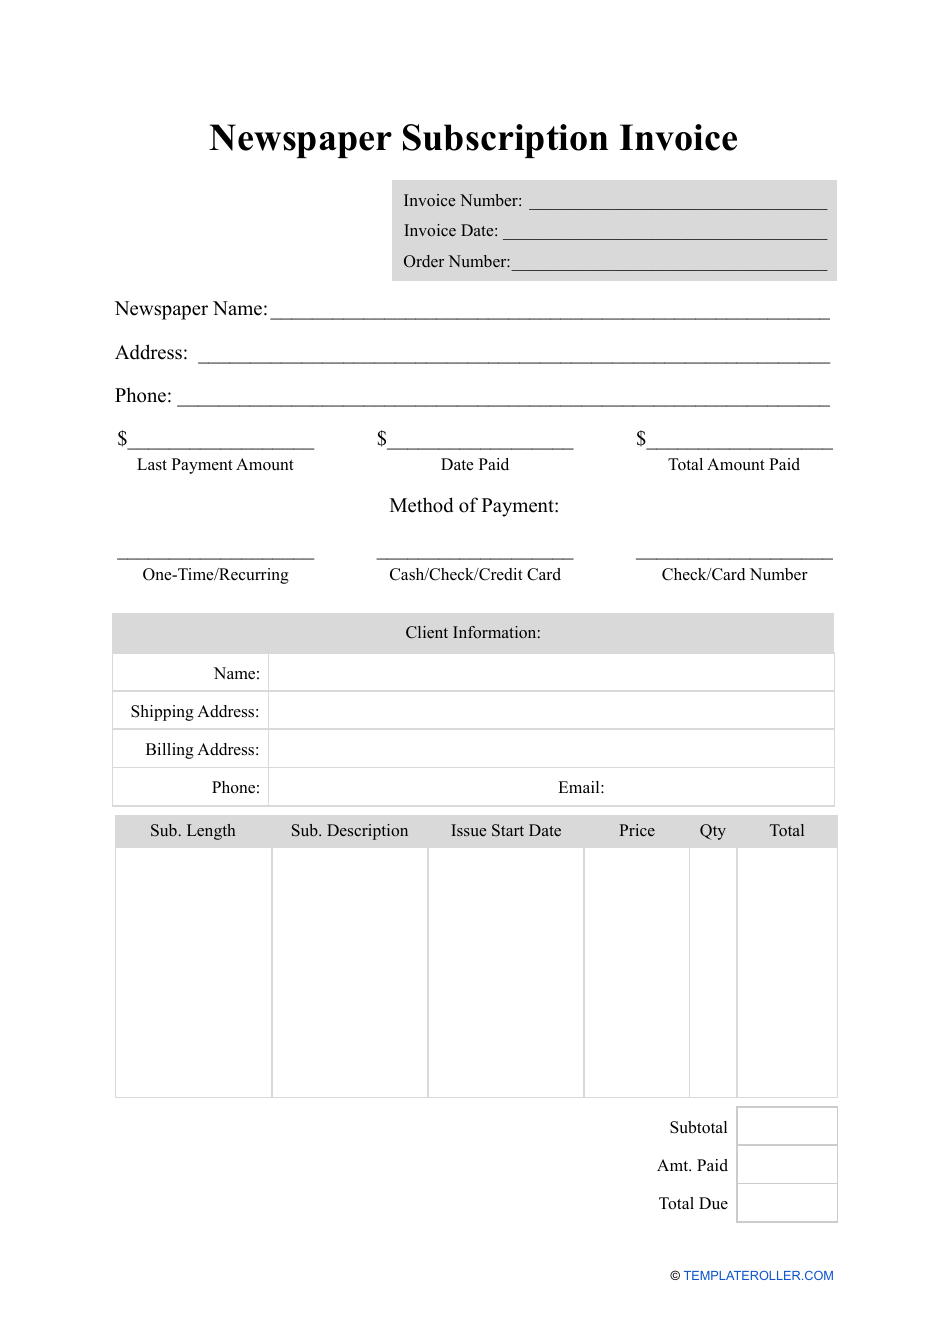 Newspaper Subscription Invoice Template, Page 1